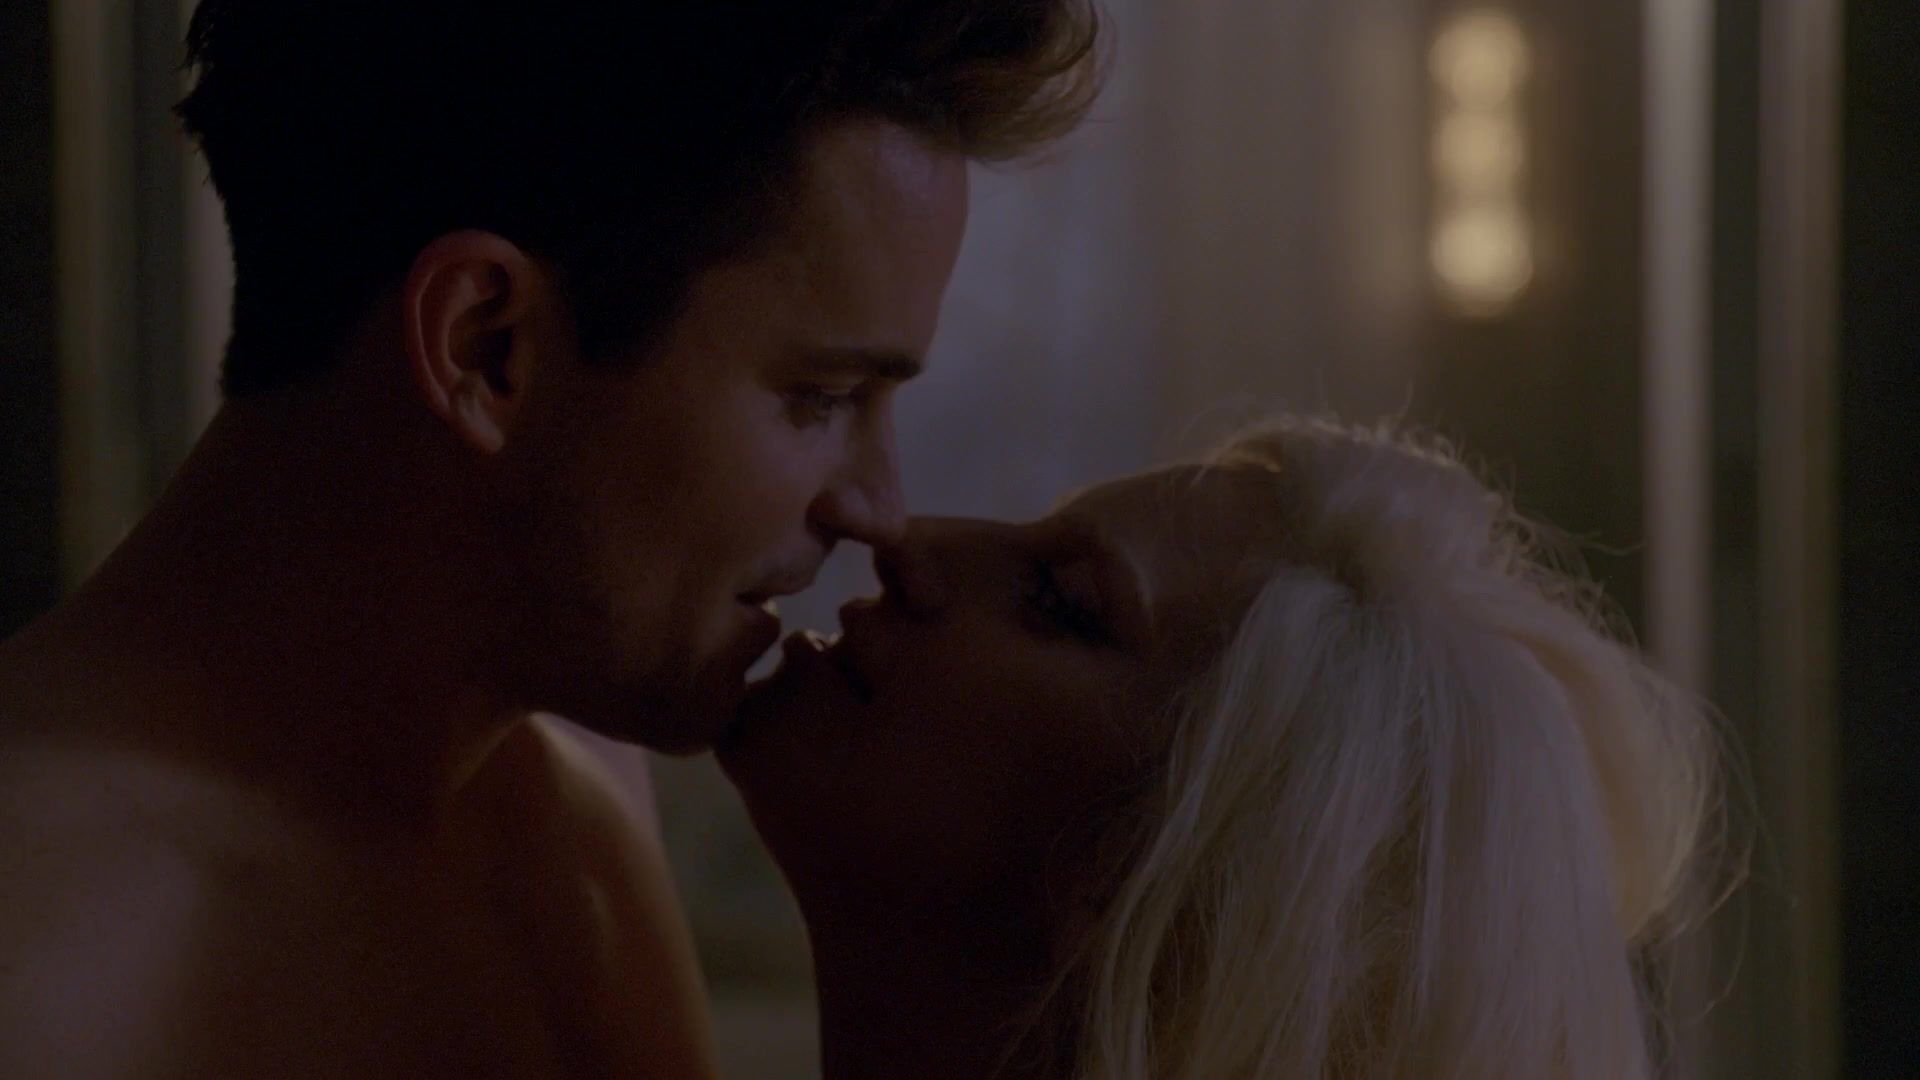 Stepbrother Lady Gaga nude in American Horror Story S5 E9 Exgirlfriend - 2